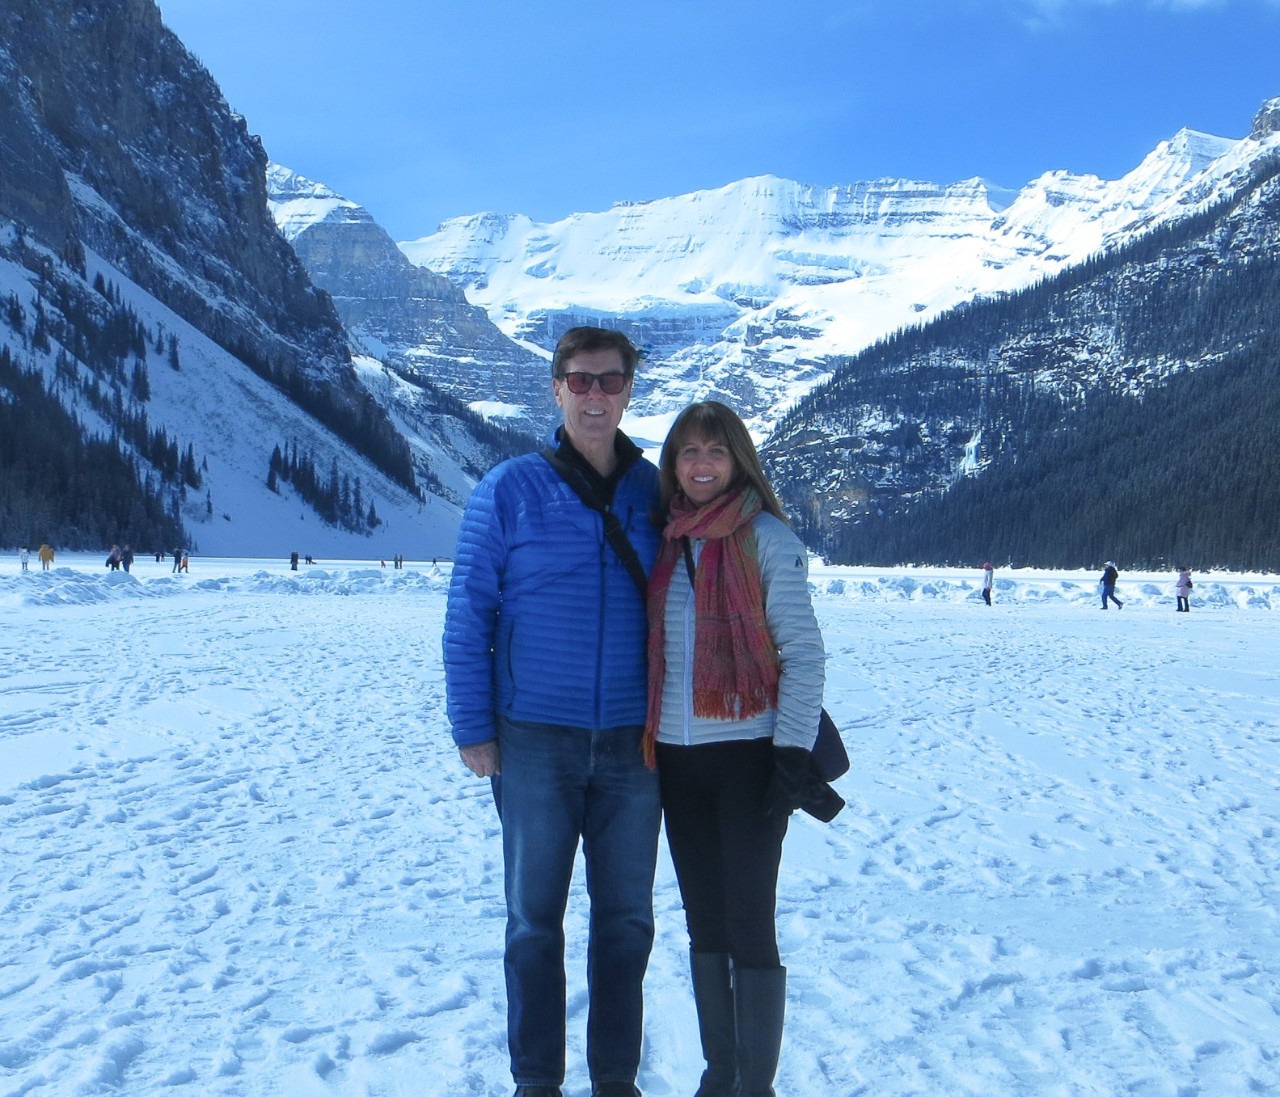 Brenda Hogan stands smiling with her fiance in a snowy landscape with snow covered mountains in the background.